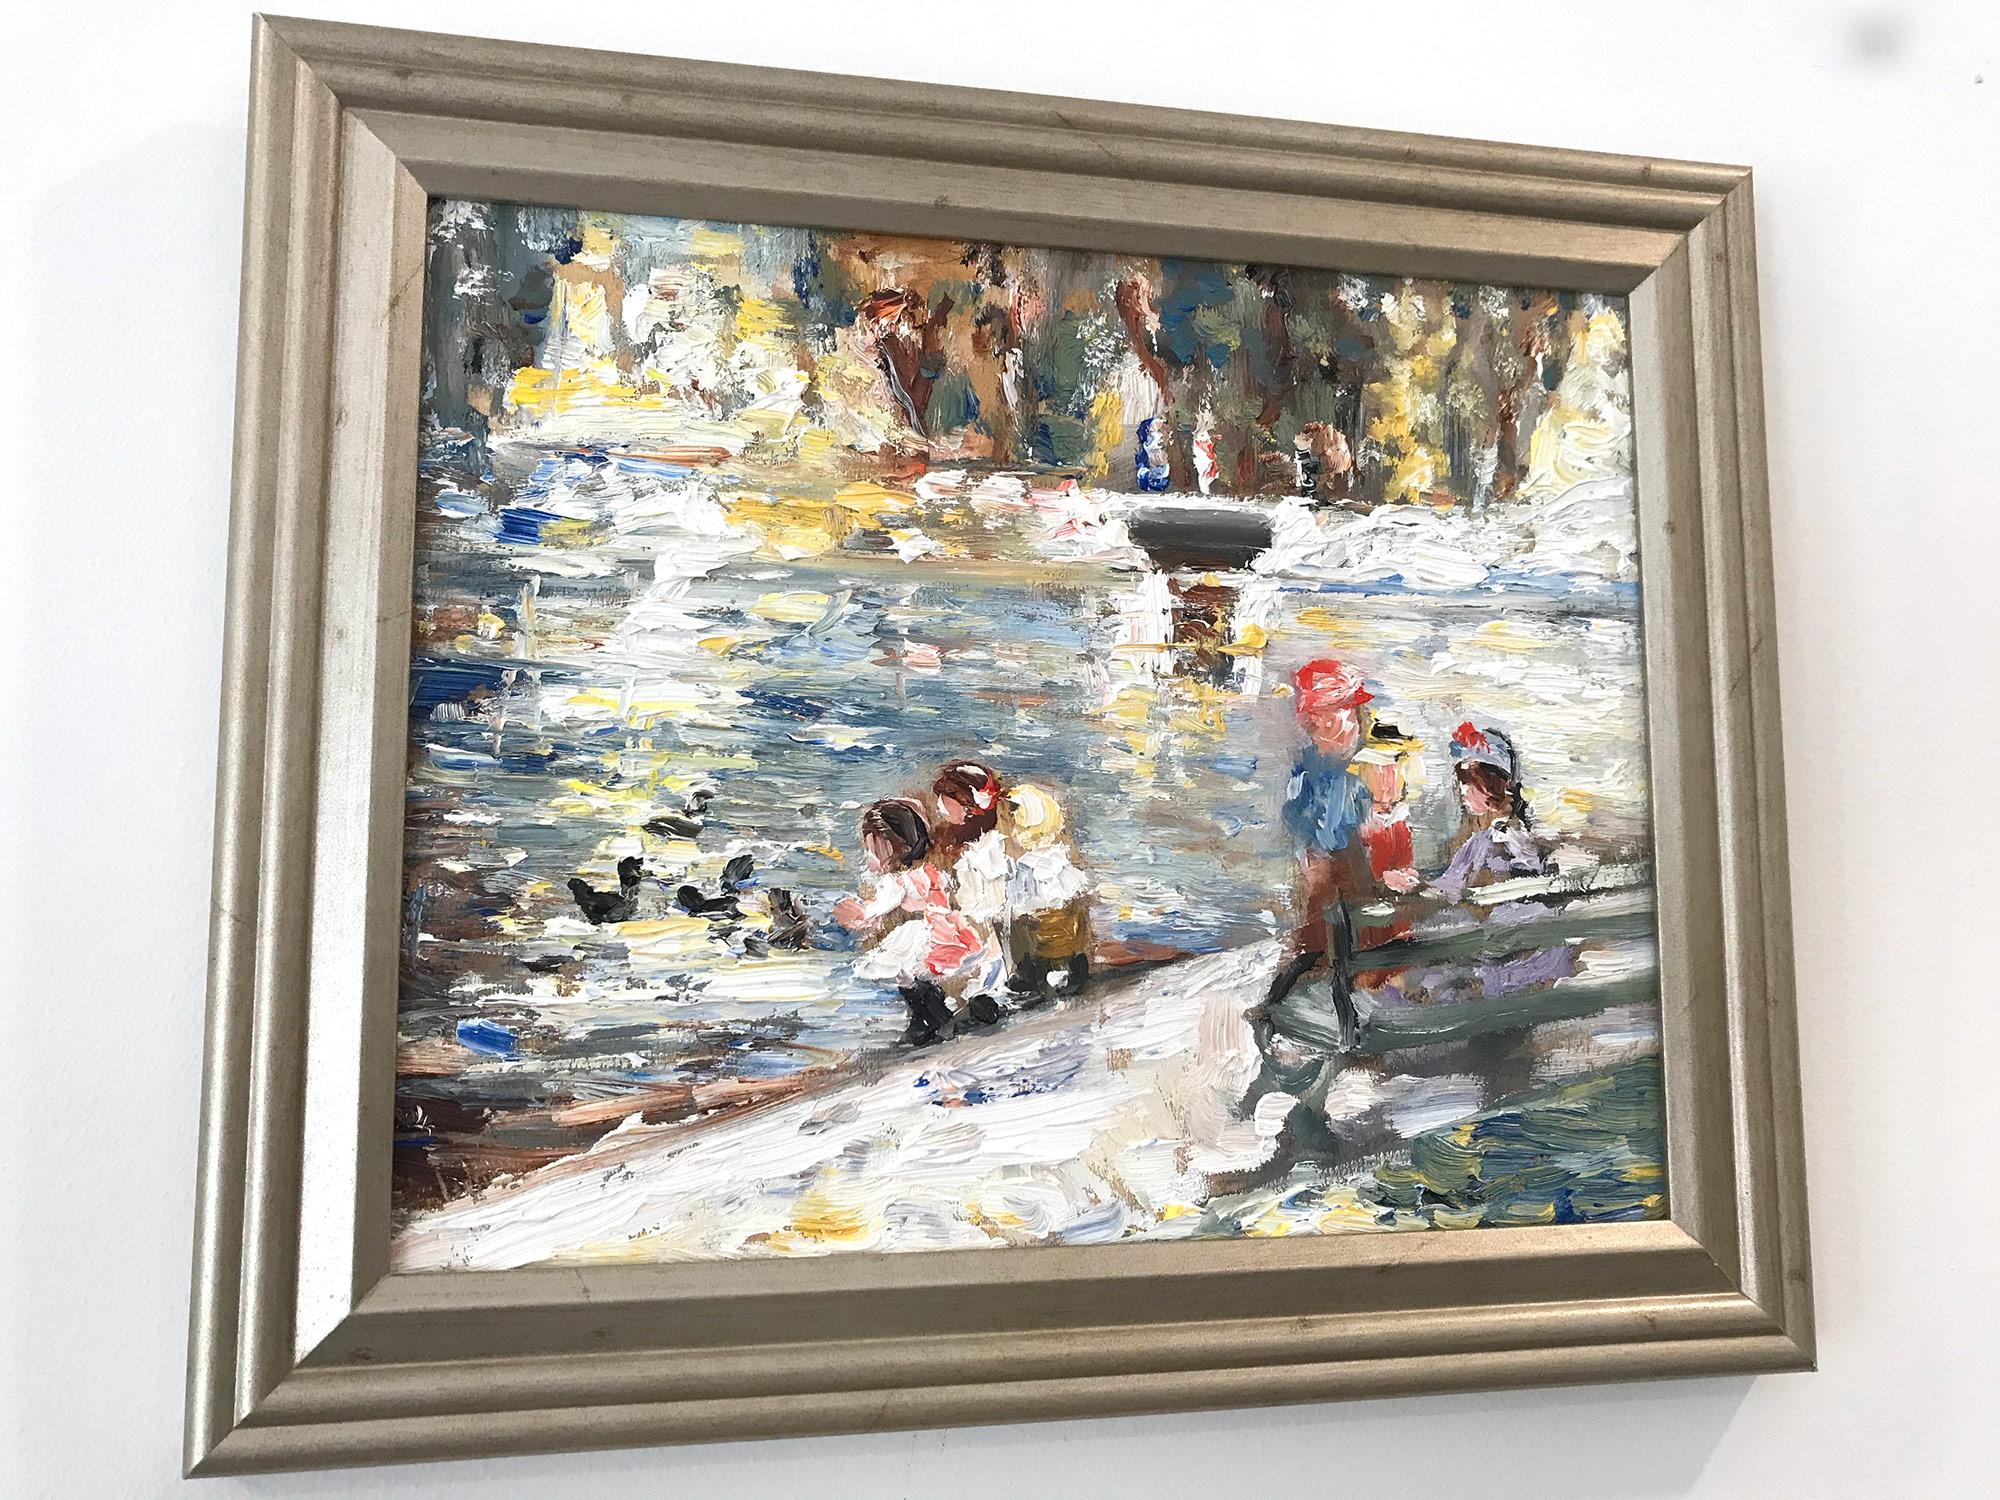 This painting depicts an impressionistic scene in Central Park with beautiful brushwork and whimsical colors. The work is a following of Edward Potthast, capturing the park and times of the early 20th Century similarly to his work.

Art measures 8 x